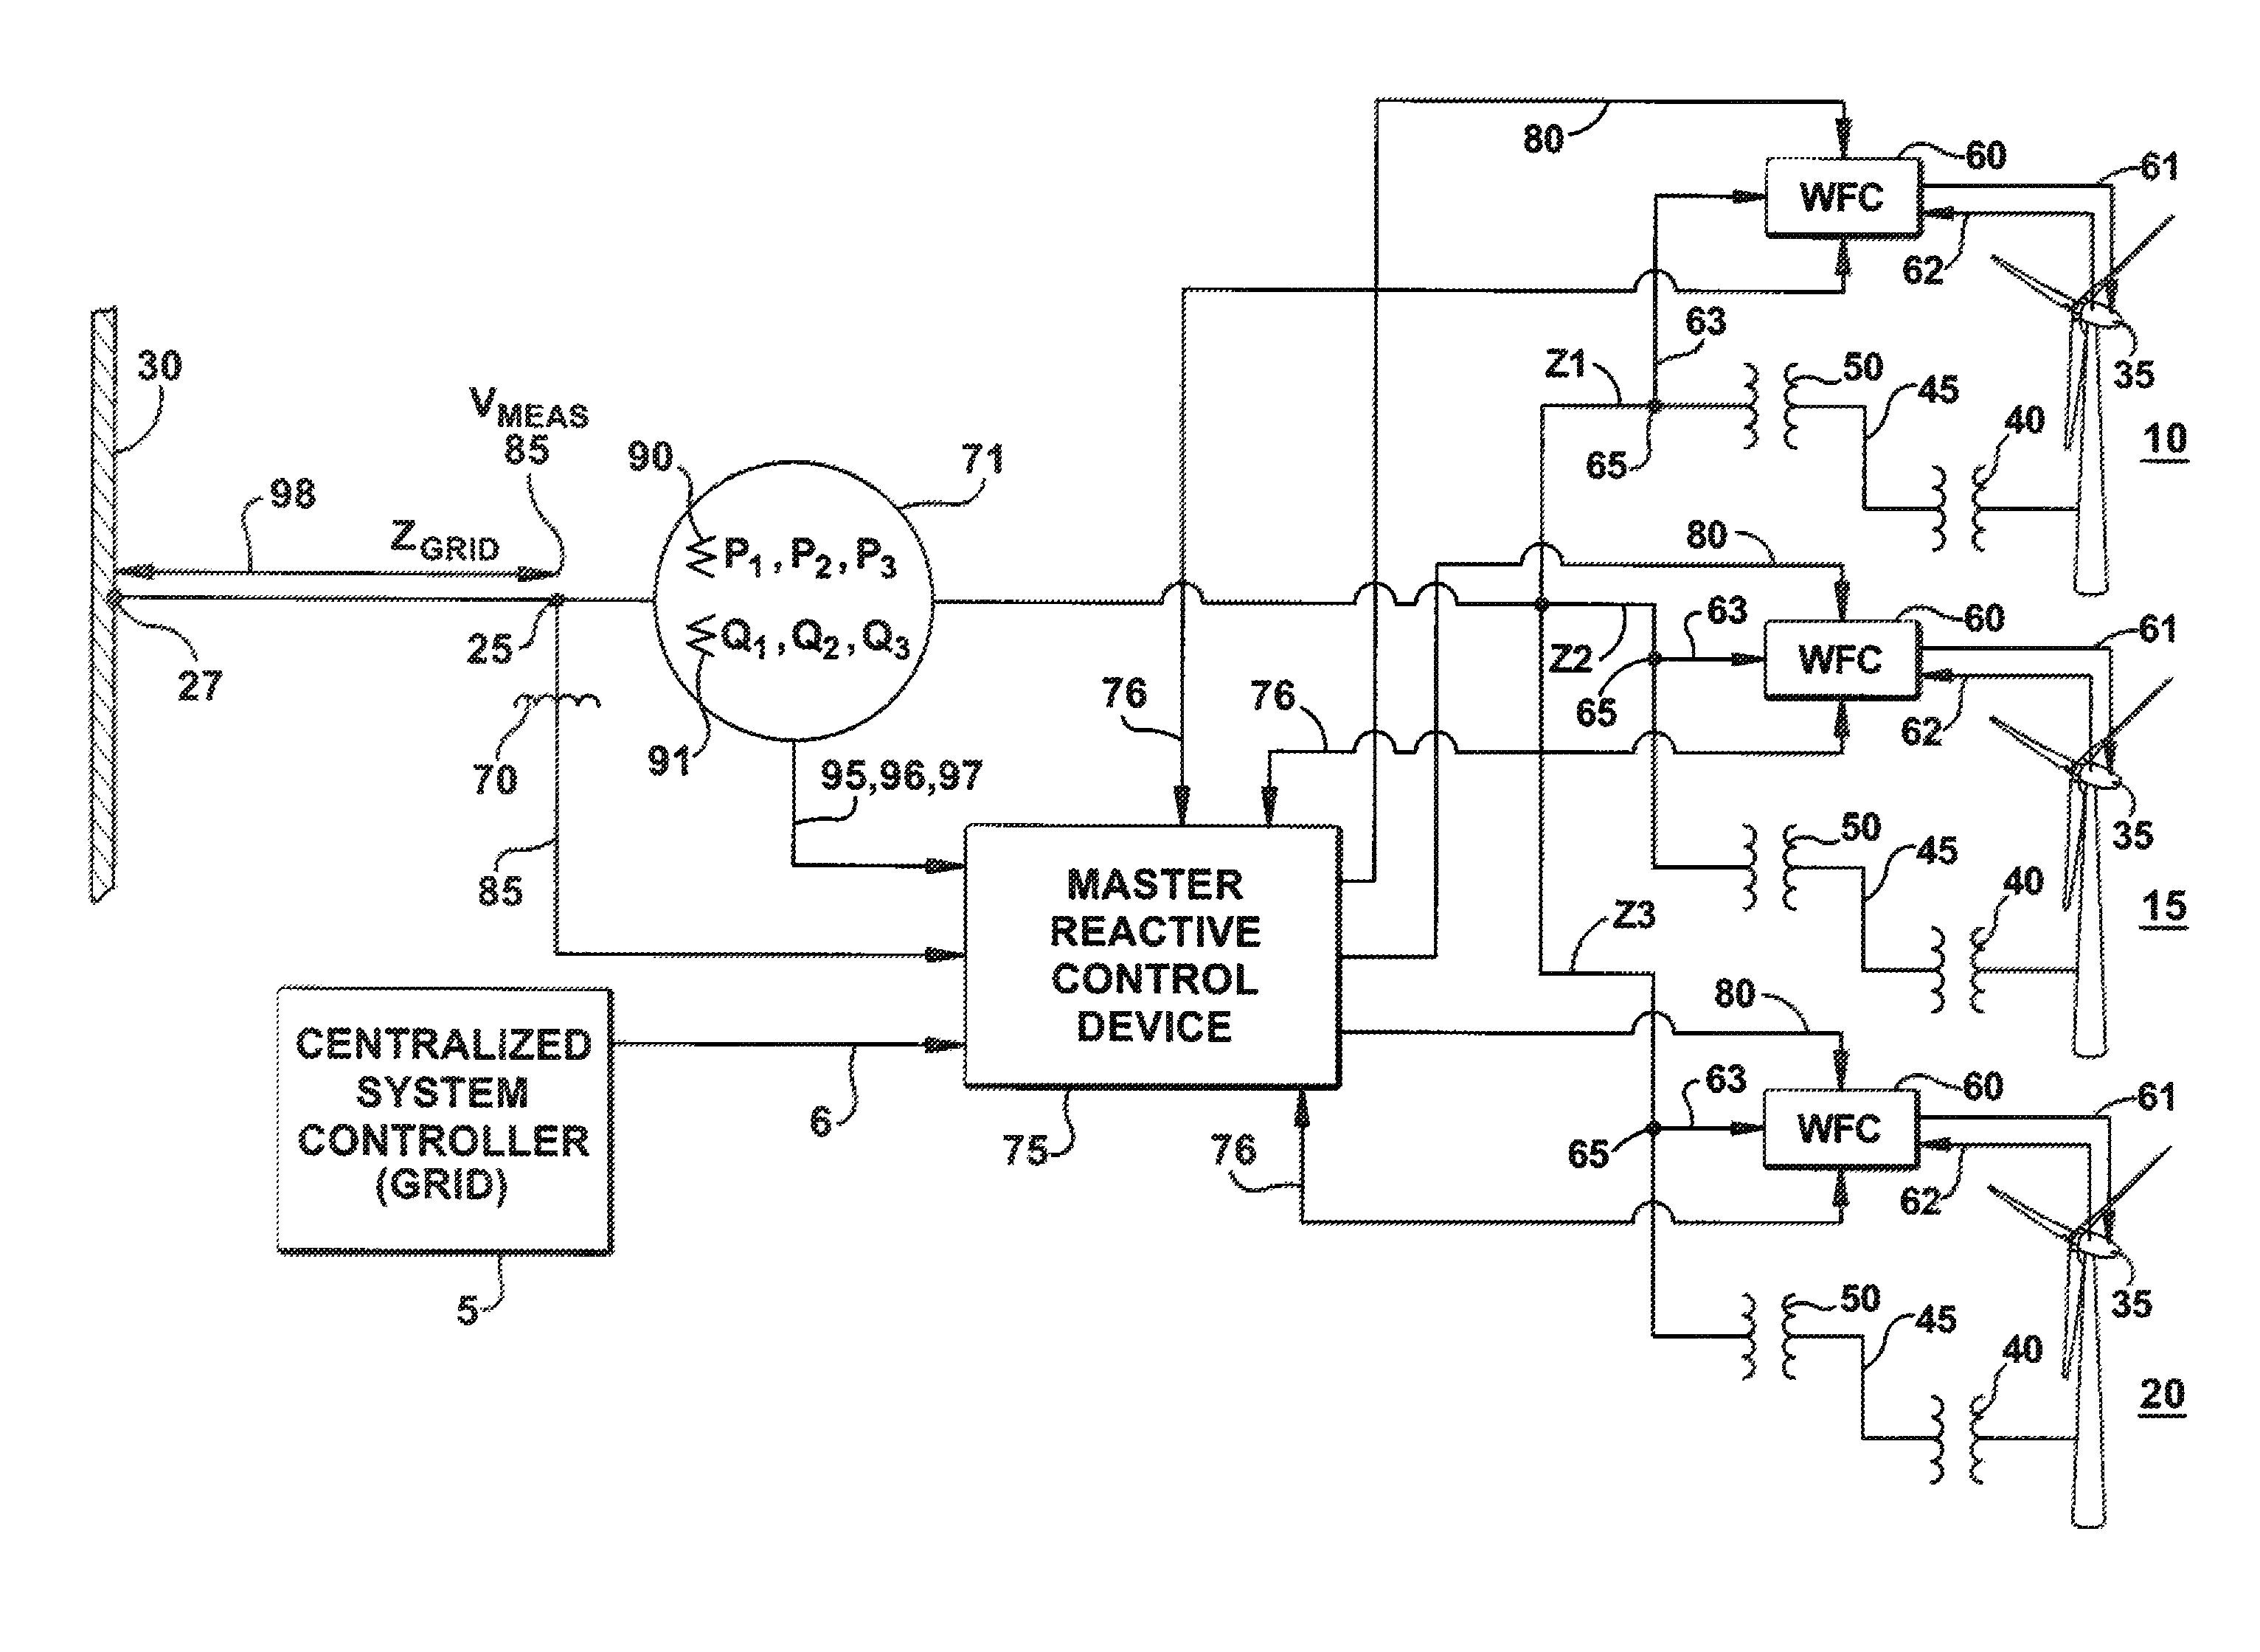 Intra-area master reactive controller for tightly coupled windfarms